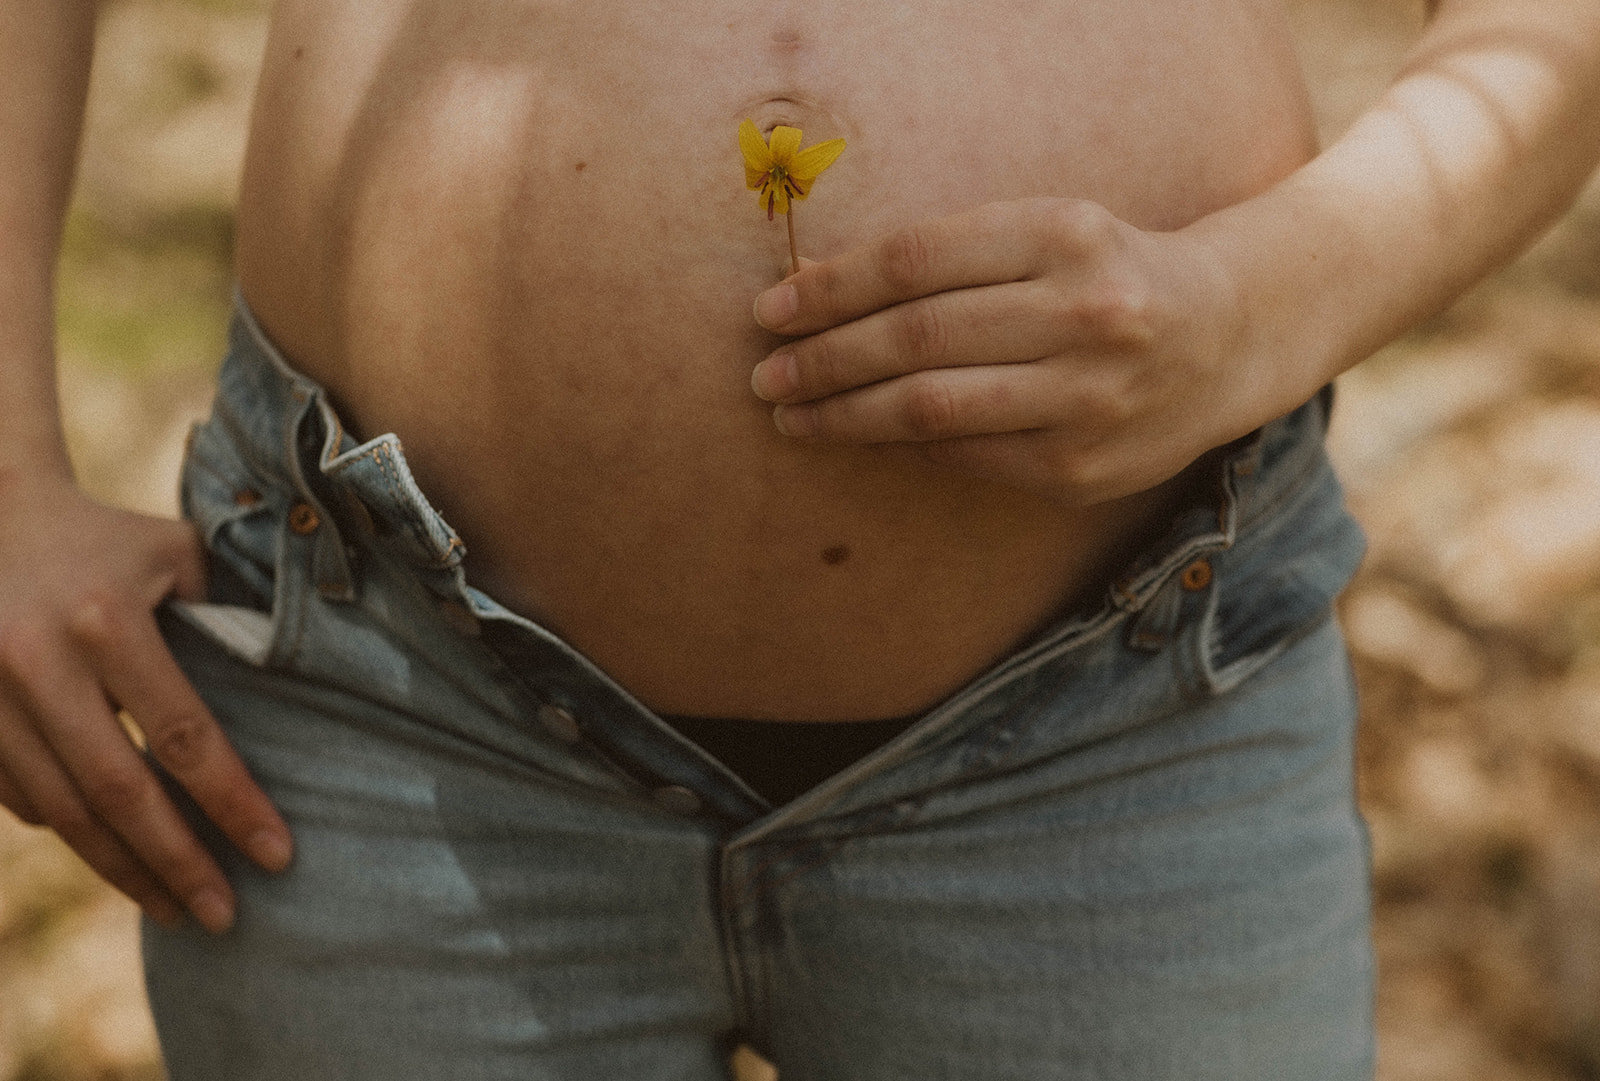 A detail shot of the future moms tummy and a yellow wild flower